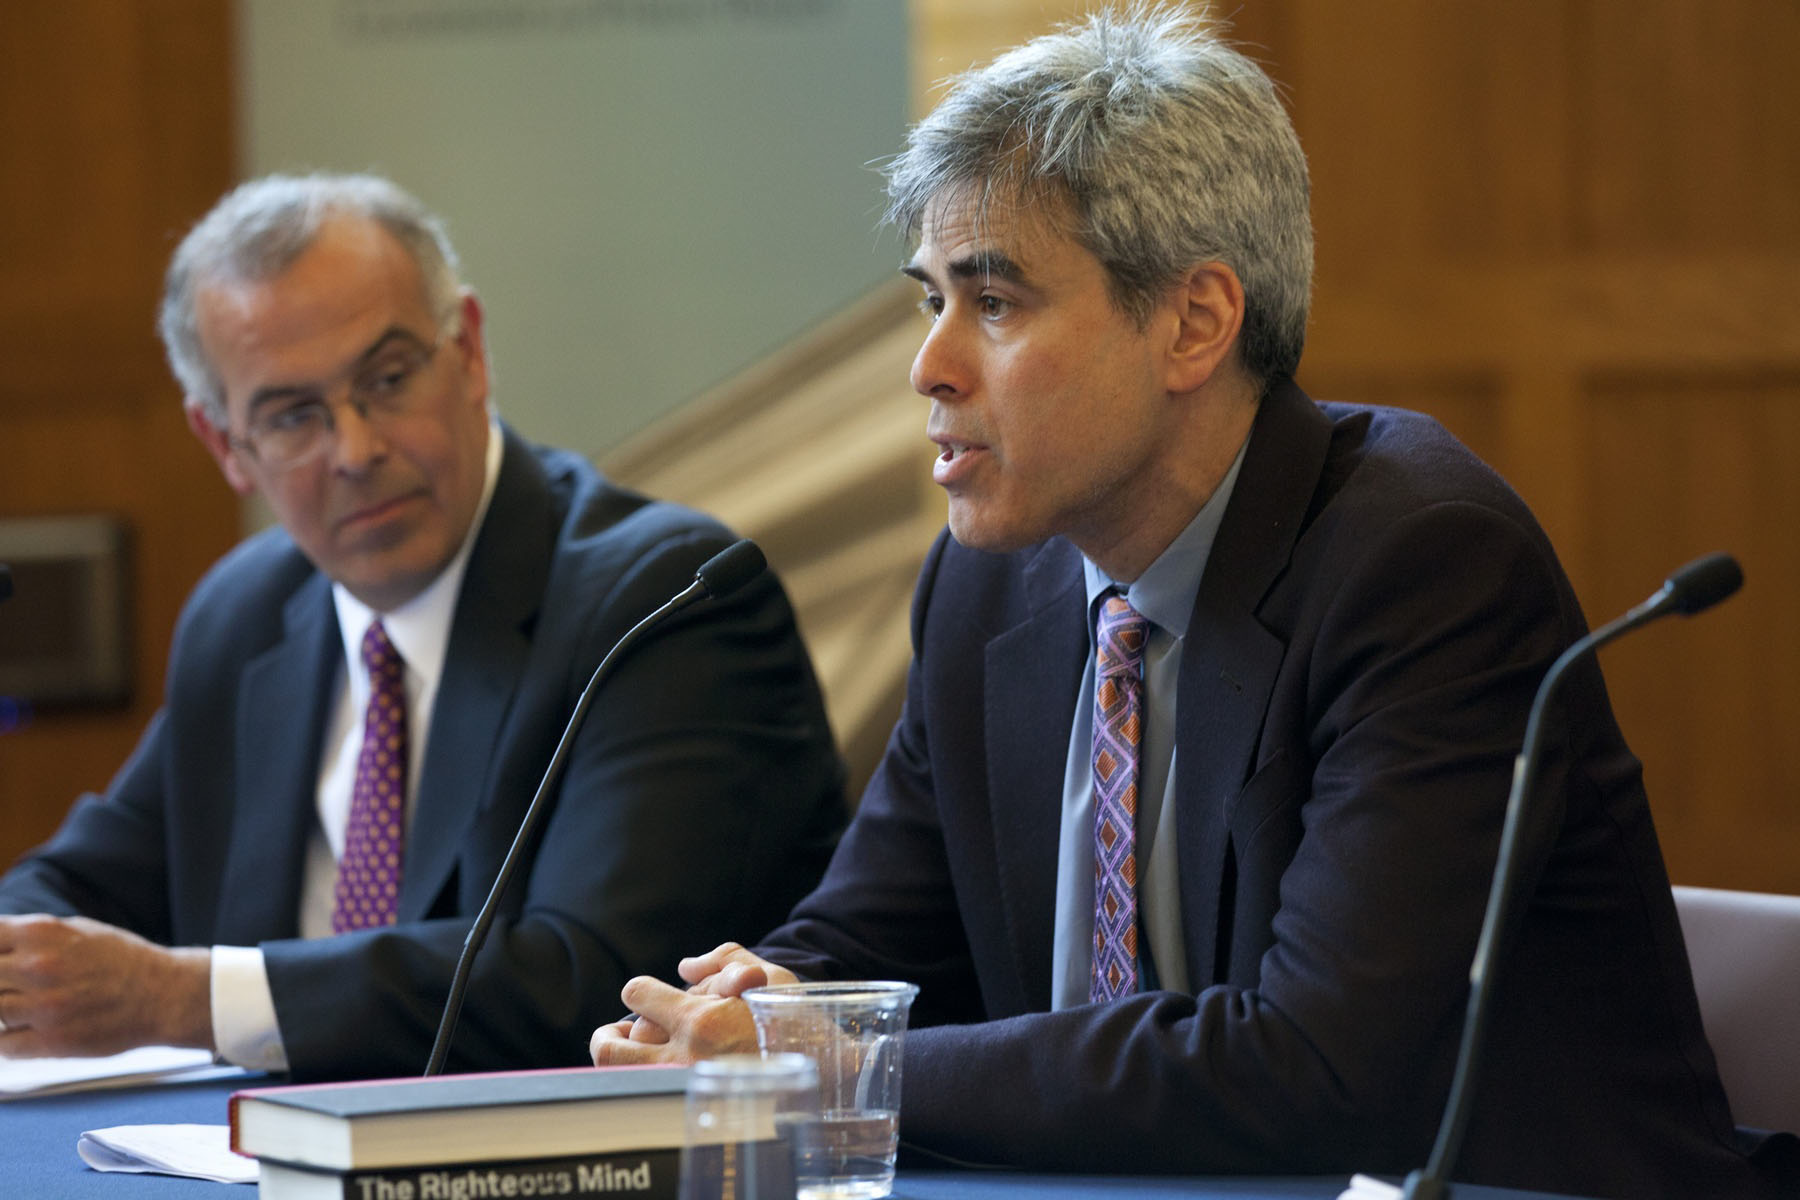 David Brooks and Jonathan Haidt talk to a crowd during a panel discussion